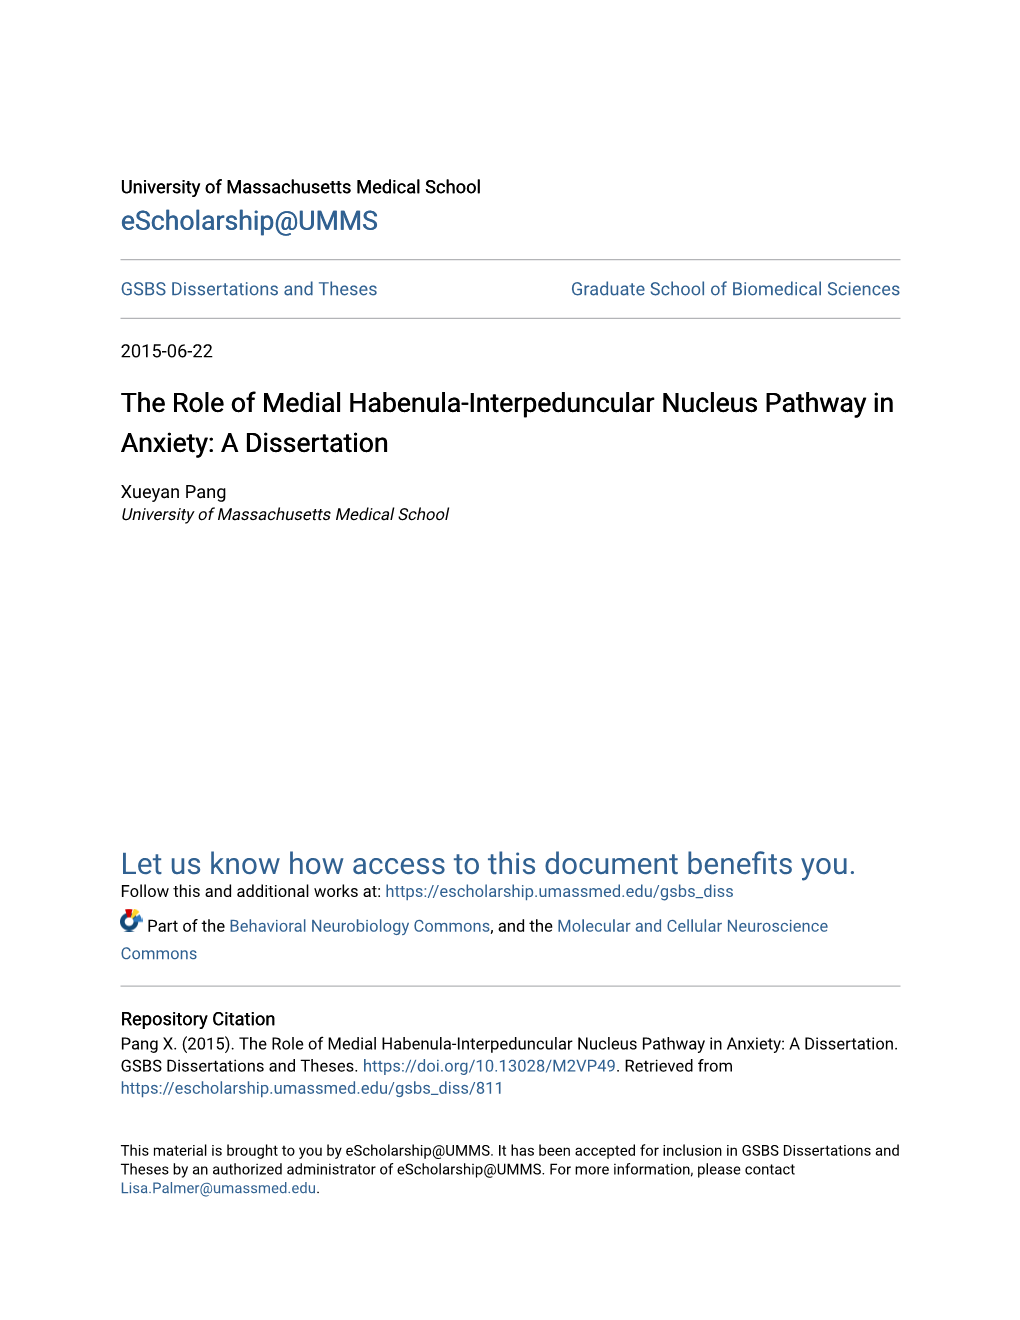 The Role of Medial Habenula-Interpeduncular Nucleus Pathway in Anxiety: a Dissertation